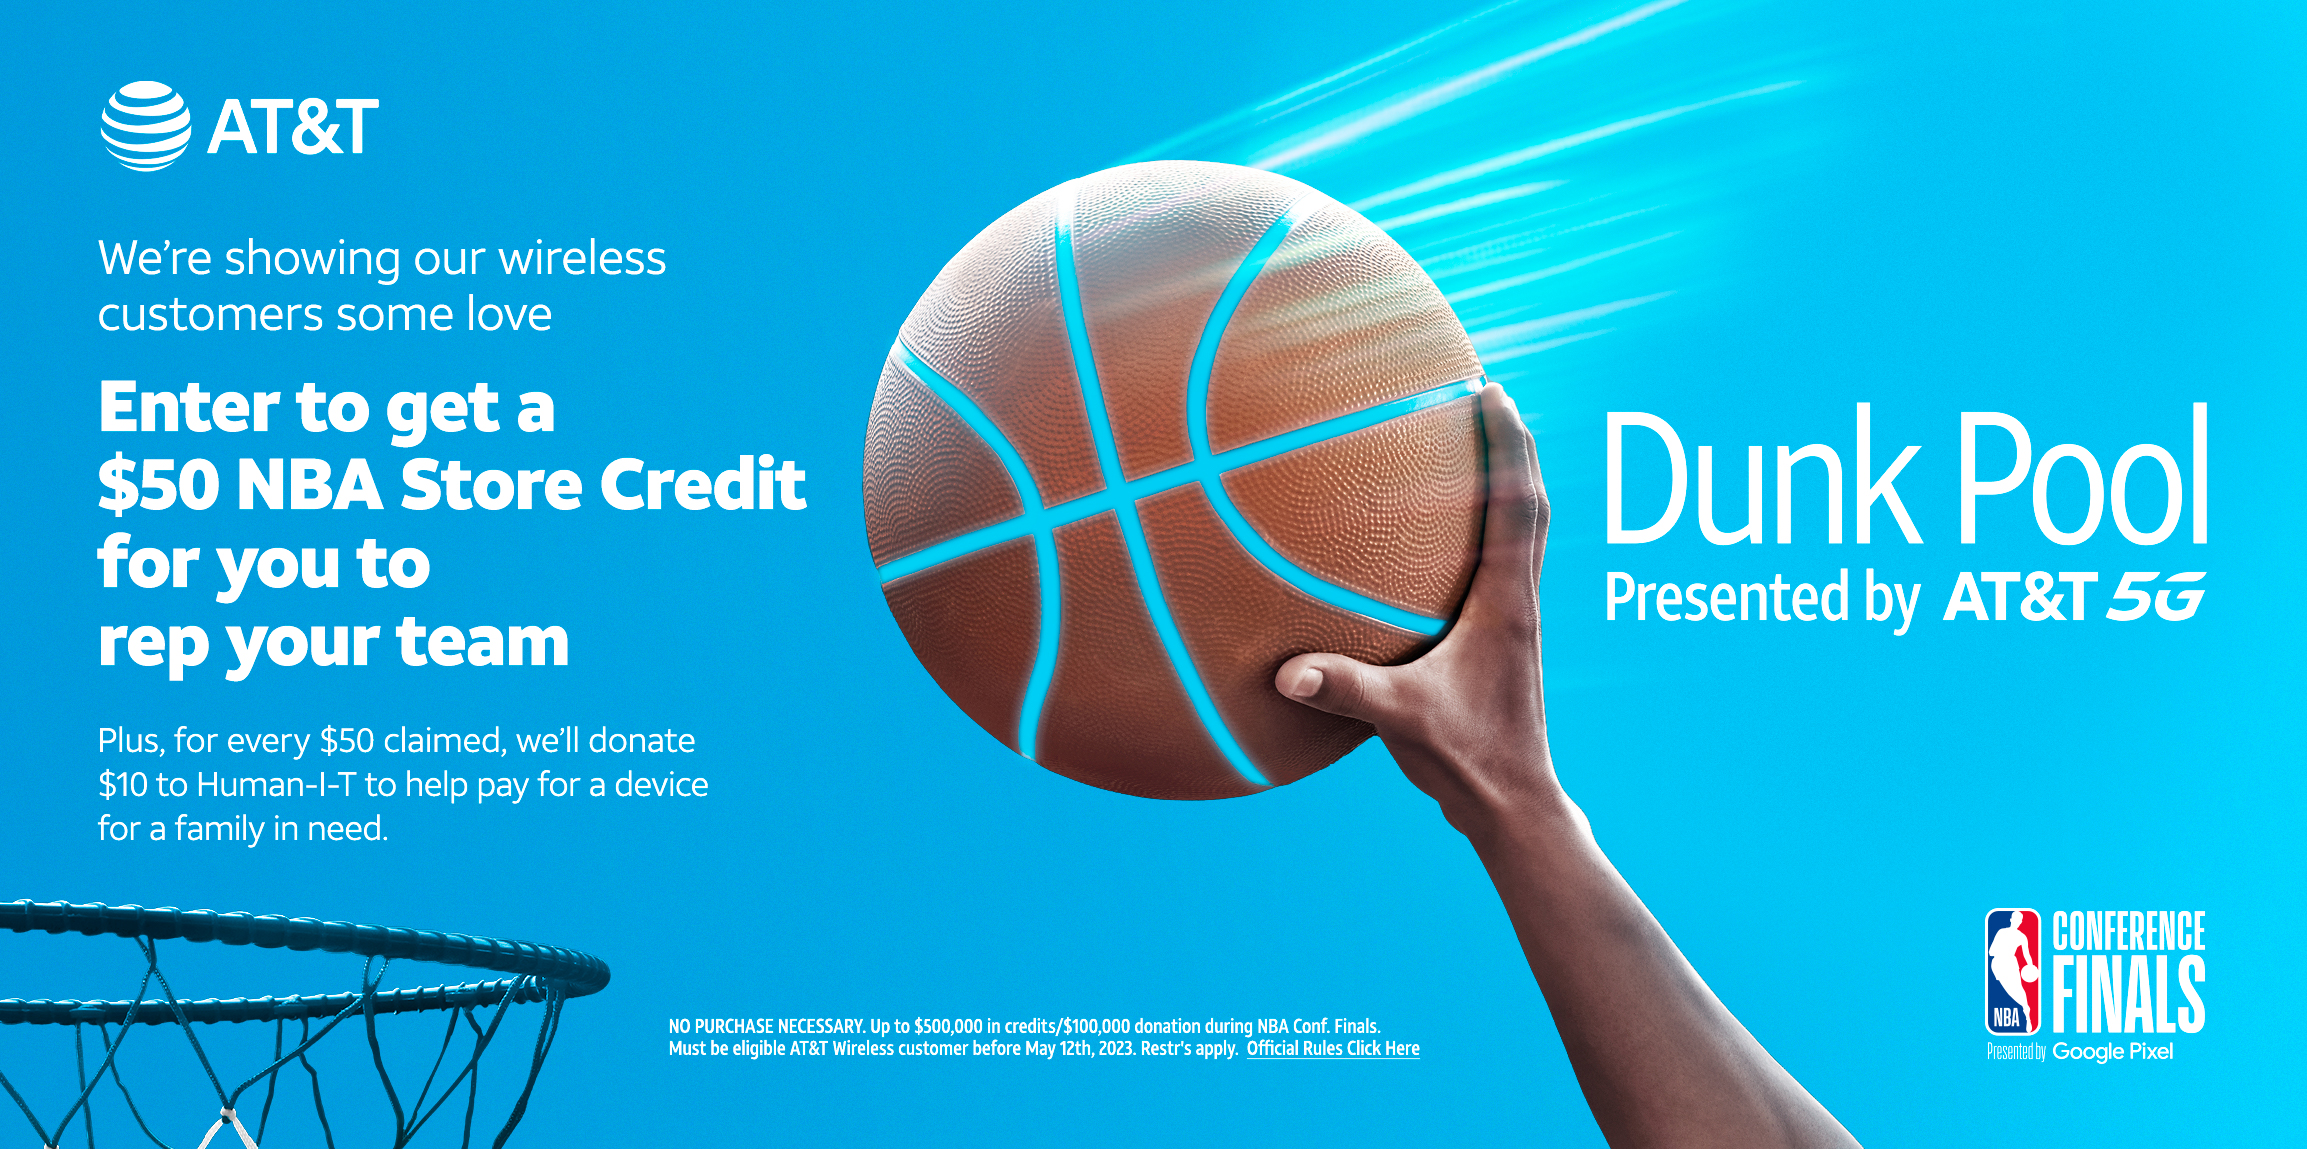 AT&T Wireless Customers: Free $50 NBA Store Credit for you to rep your team